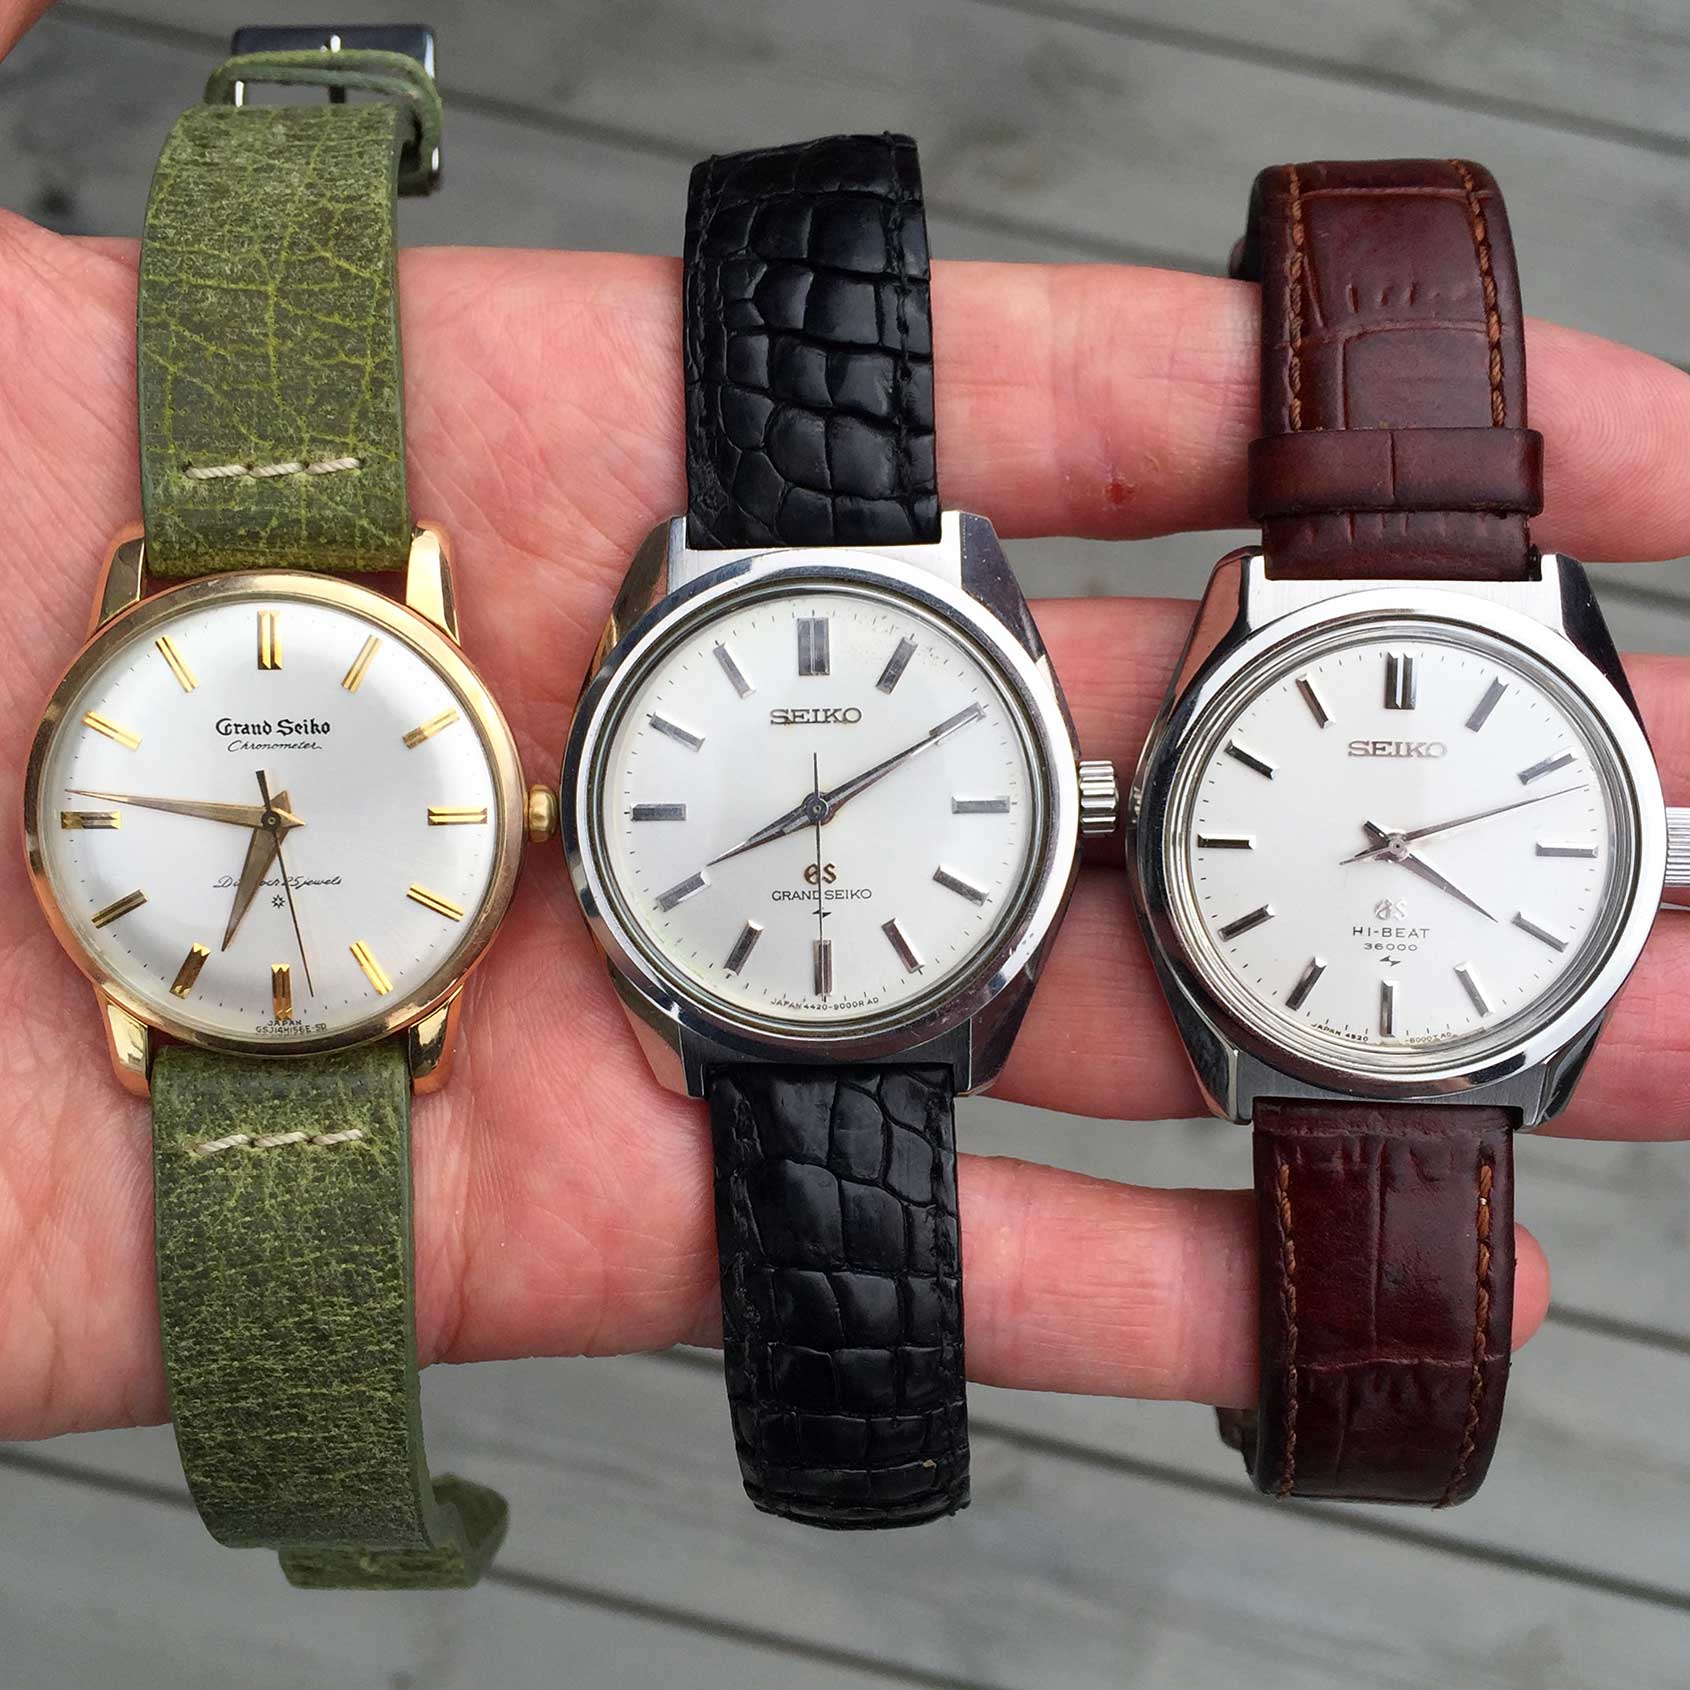 MY WATCH COLLECTION: Anders’s vintage Grand Seikos - Time and Tide Watches